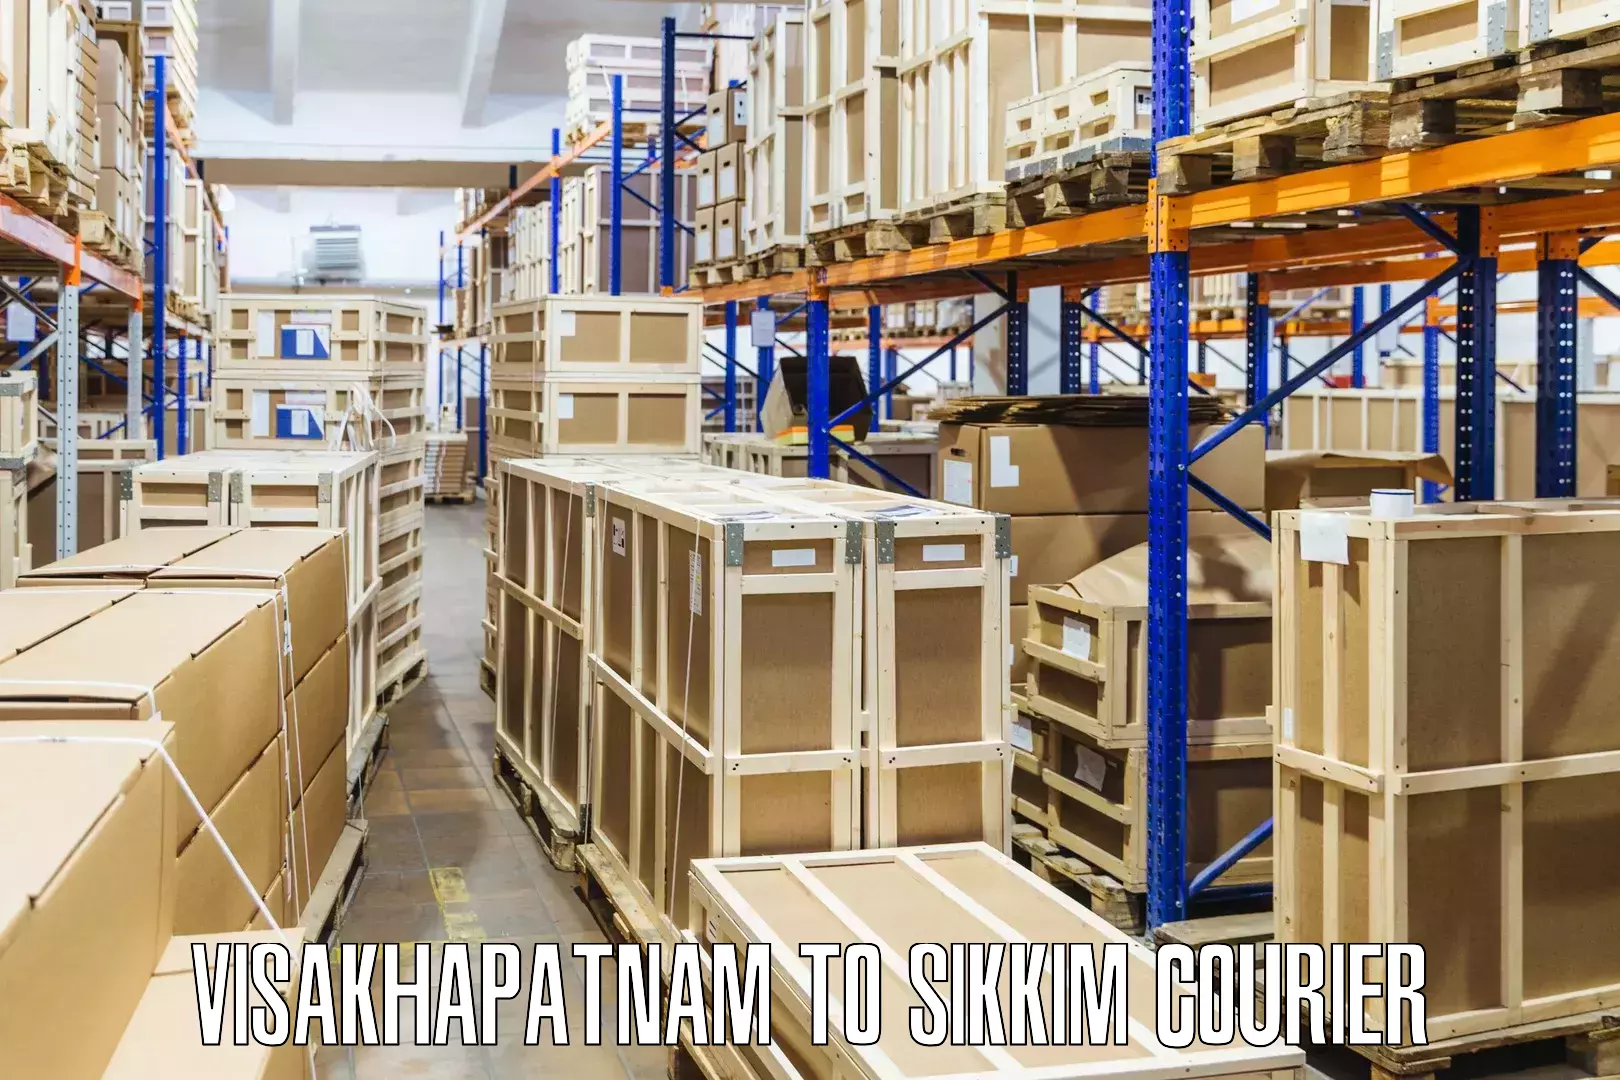 Global shipping networks Visakhapatnam to North Sikkim